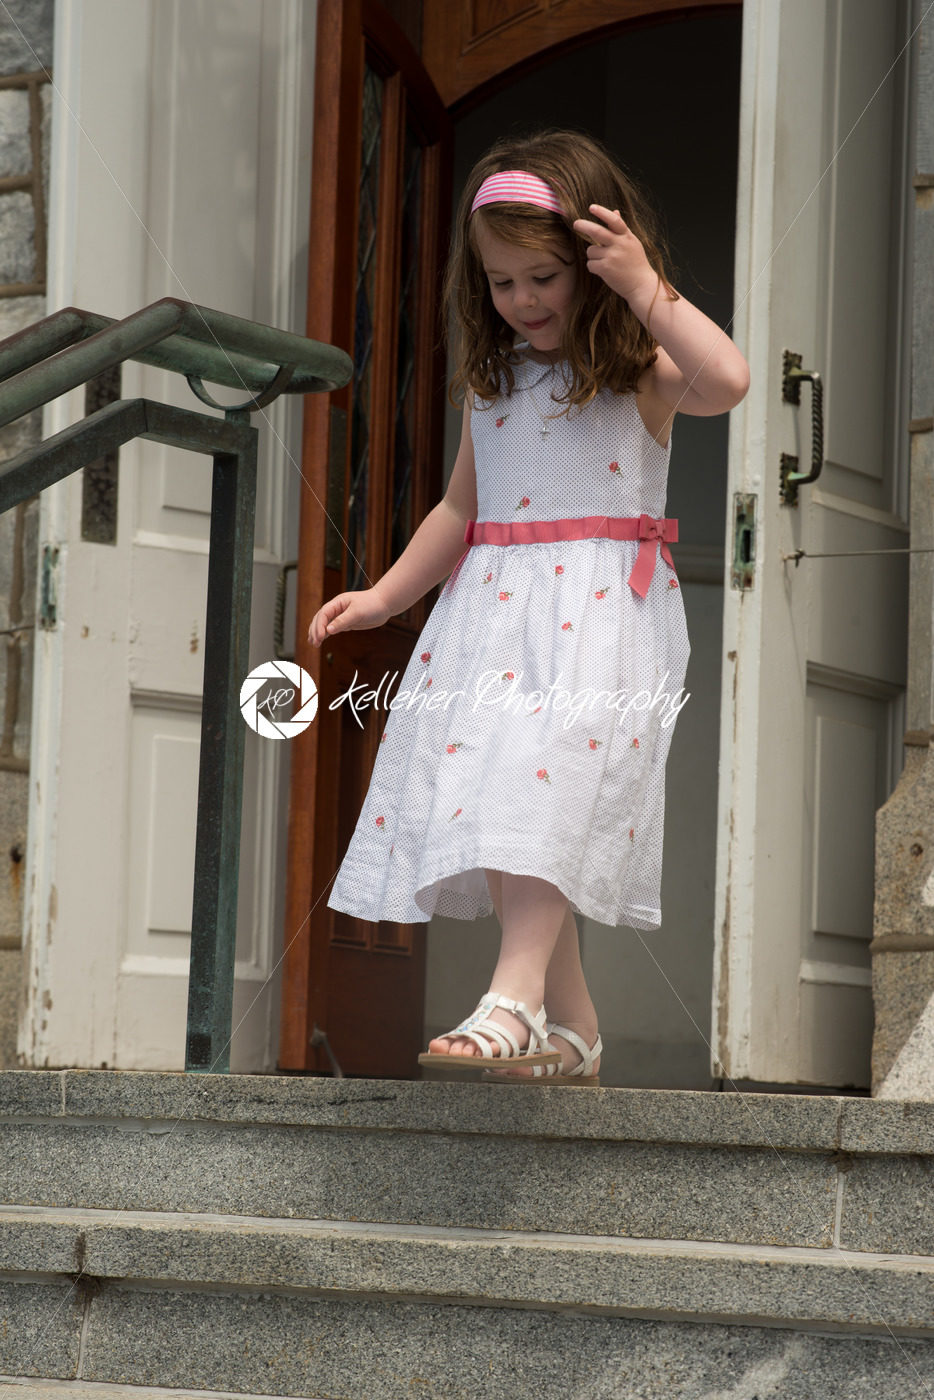 VILLANOVA, PA – MAY 14: Young Girl dressed up receiving her First Holy Communion at St. Thomas of Villanova Church - Kelleher Photography Store